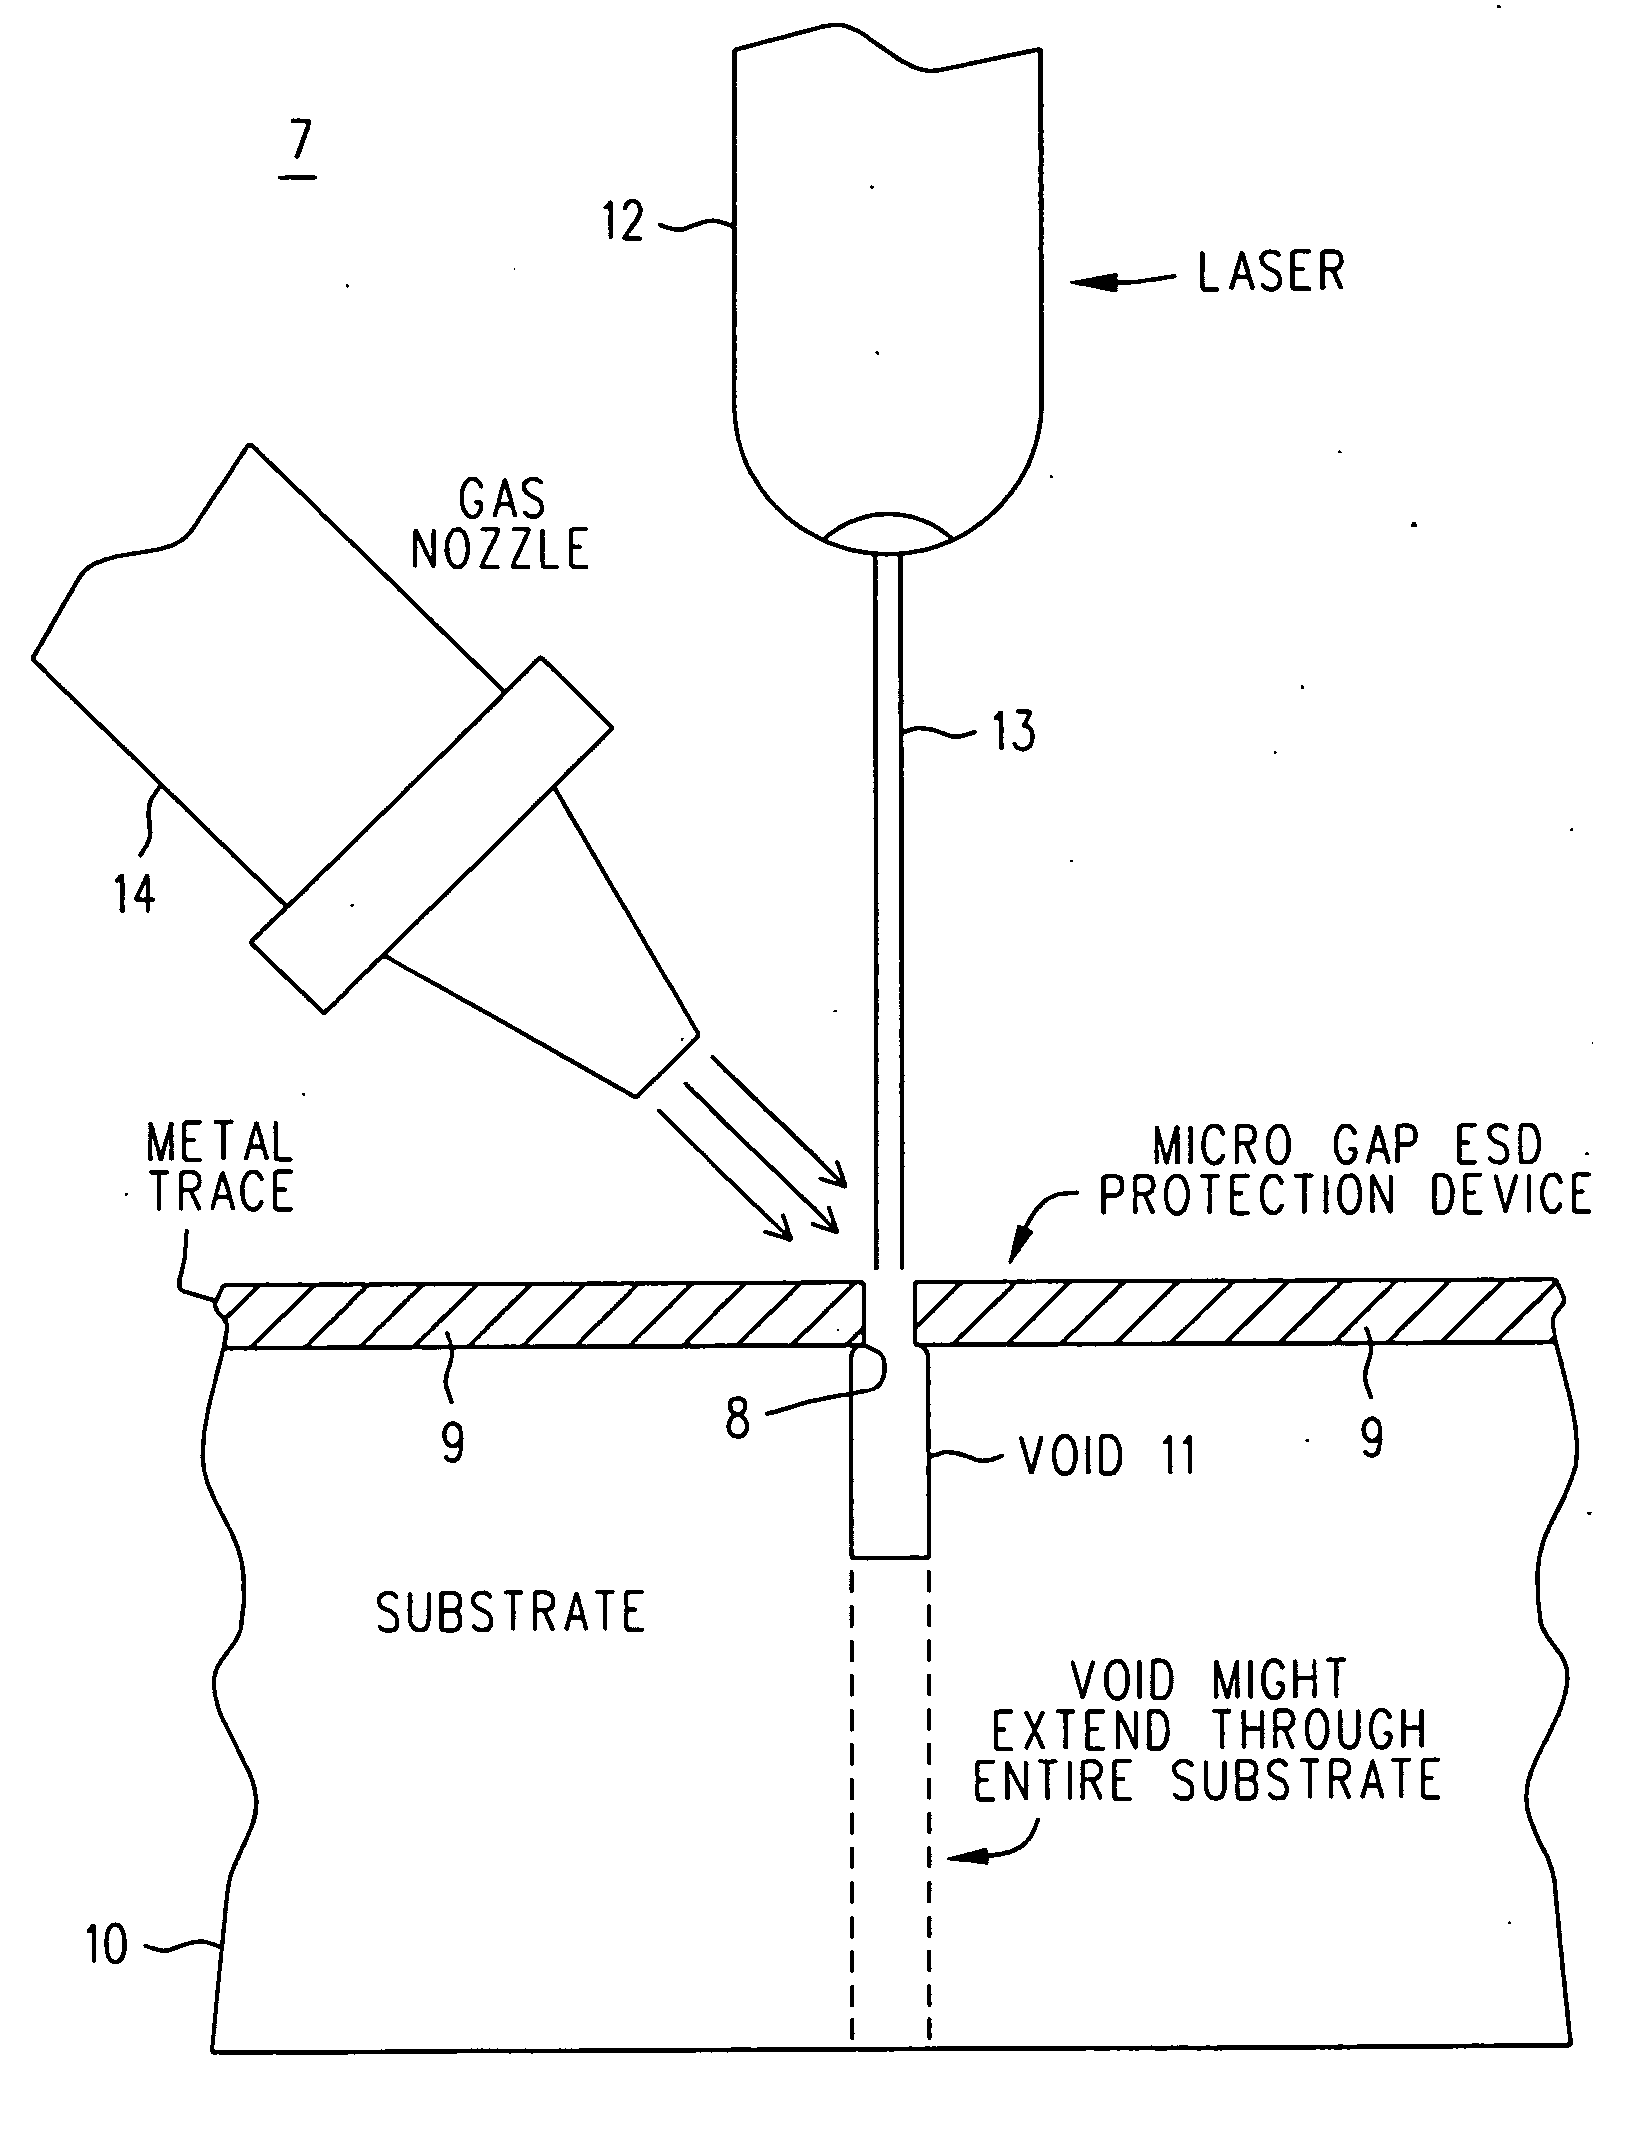 Micro gap method and ESD protection device